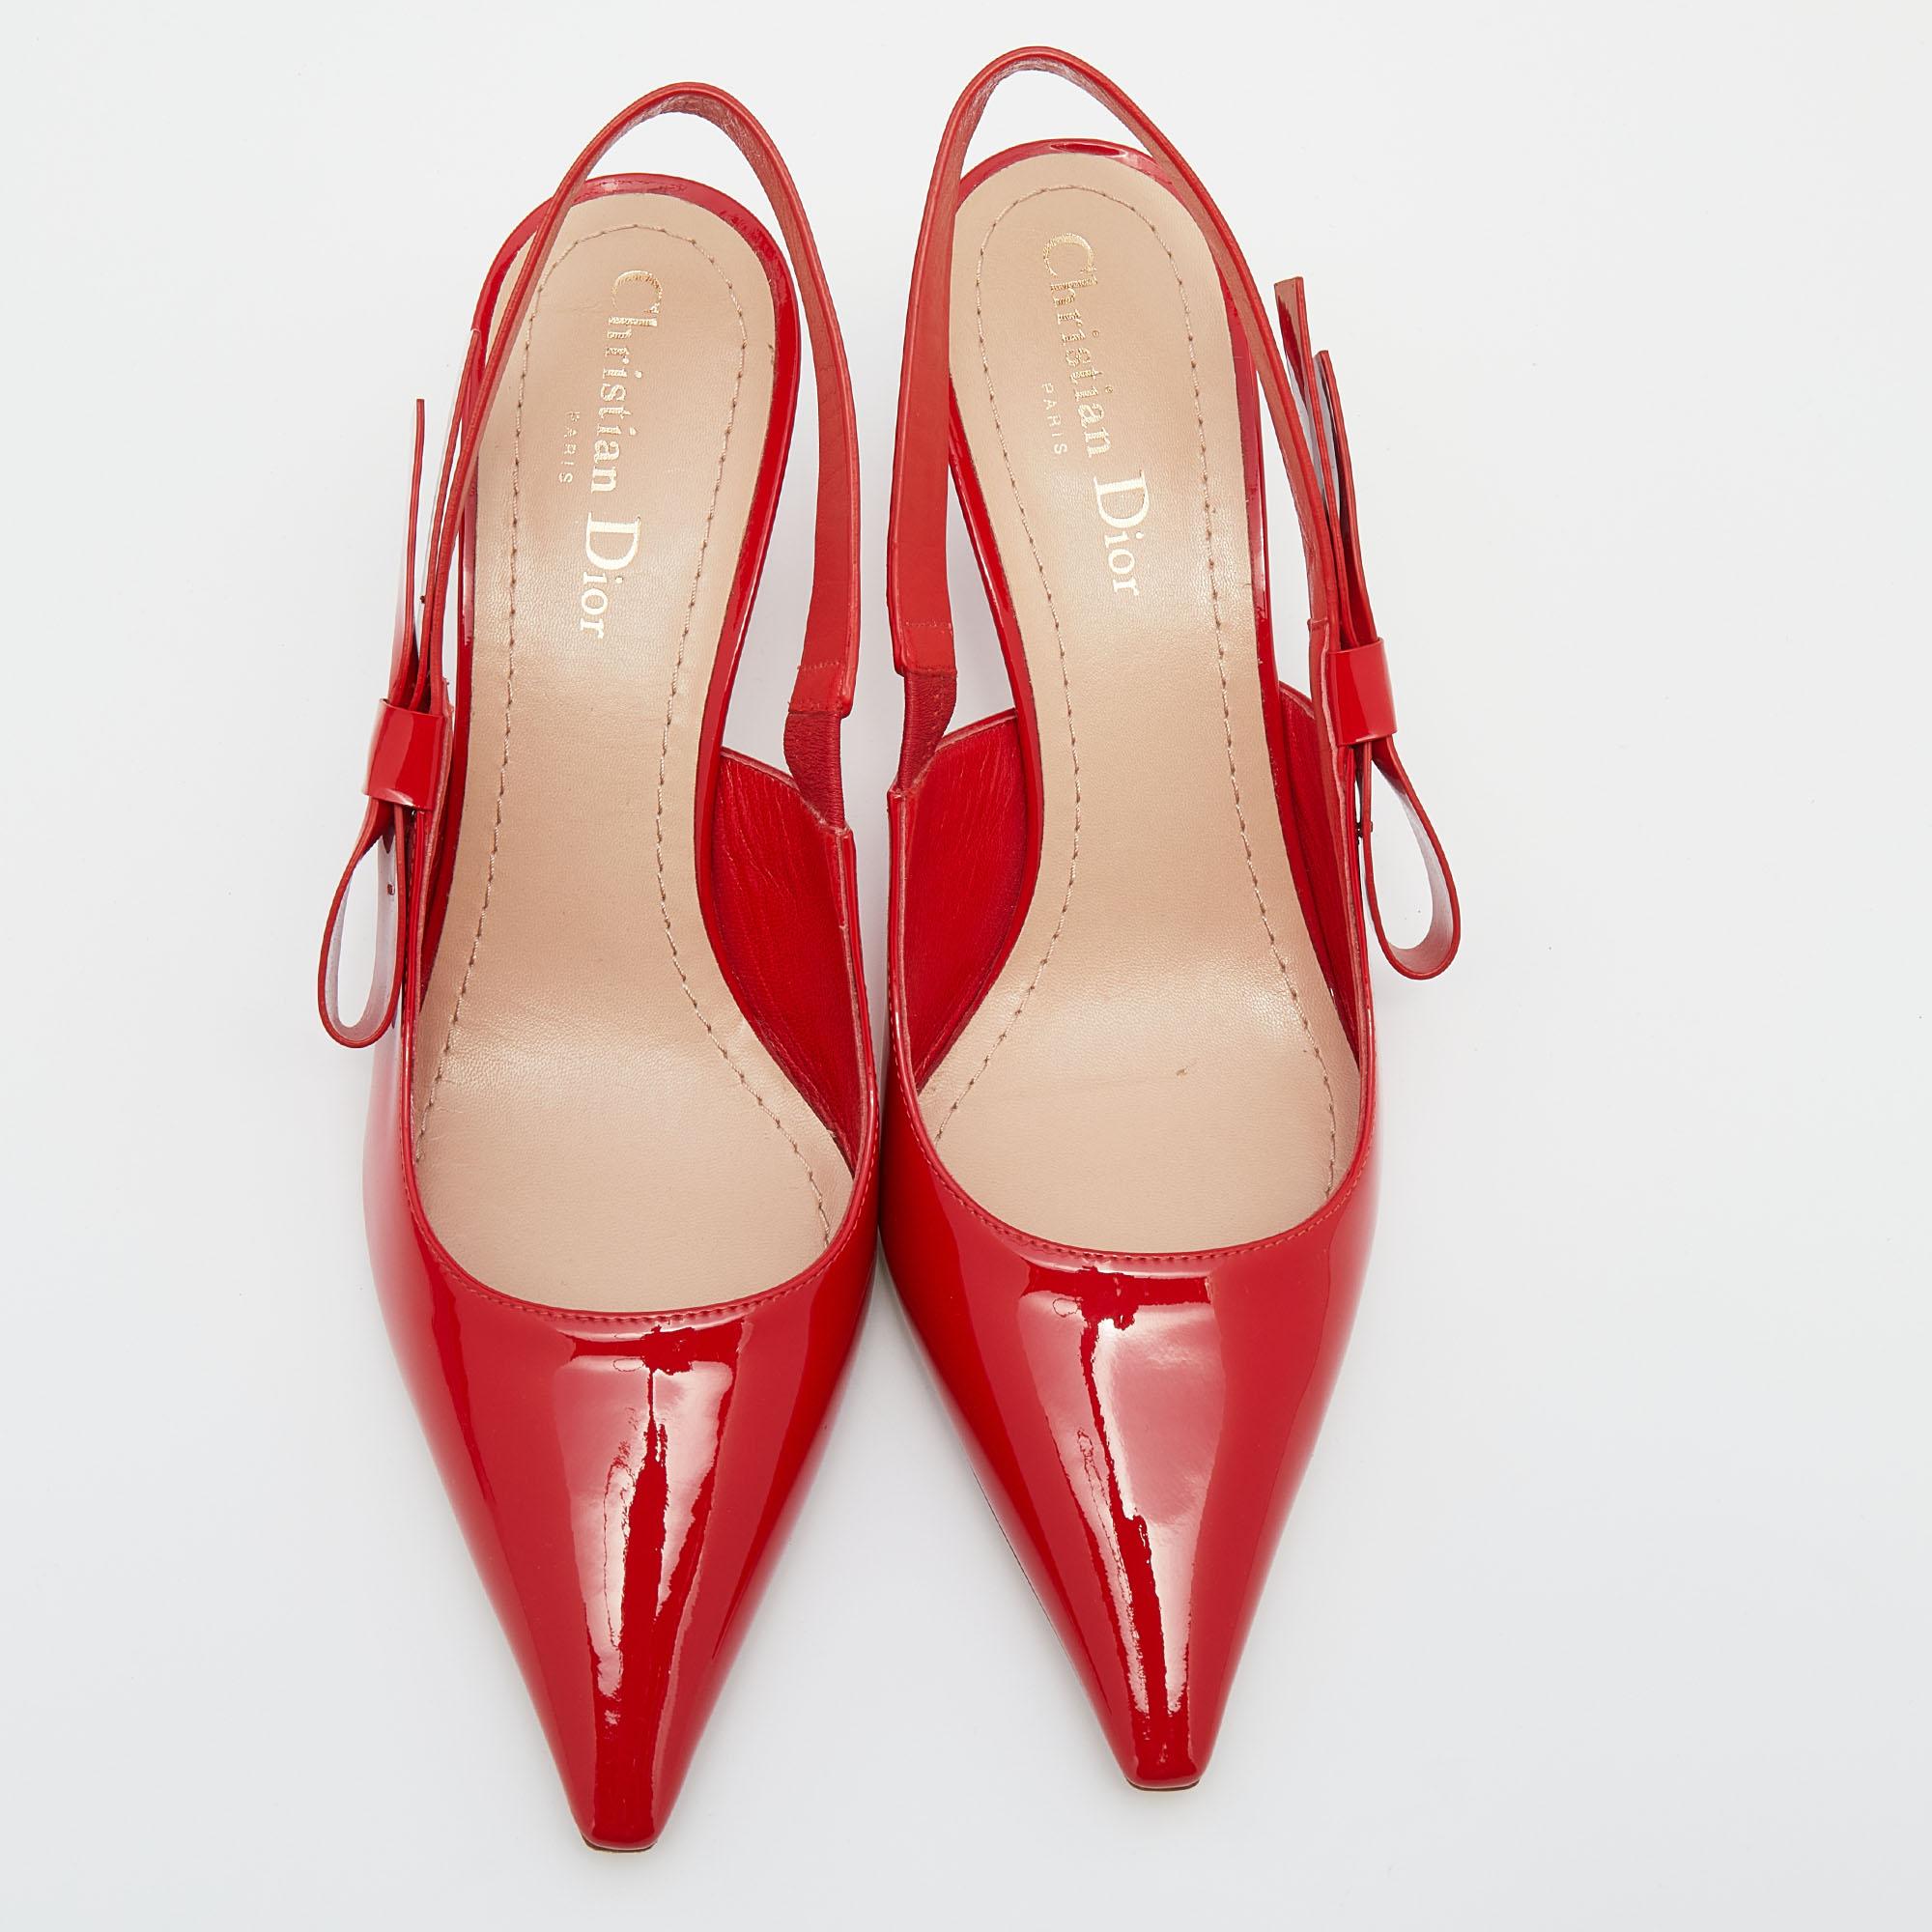 A coveted Dior silhouette that's loved by women around the world. These red Dior sandals in patent leather are styled with pointed toes and slingbacks. They are complete with comfortable leather insoles and curved heels.

Includes: Original Dustbag
